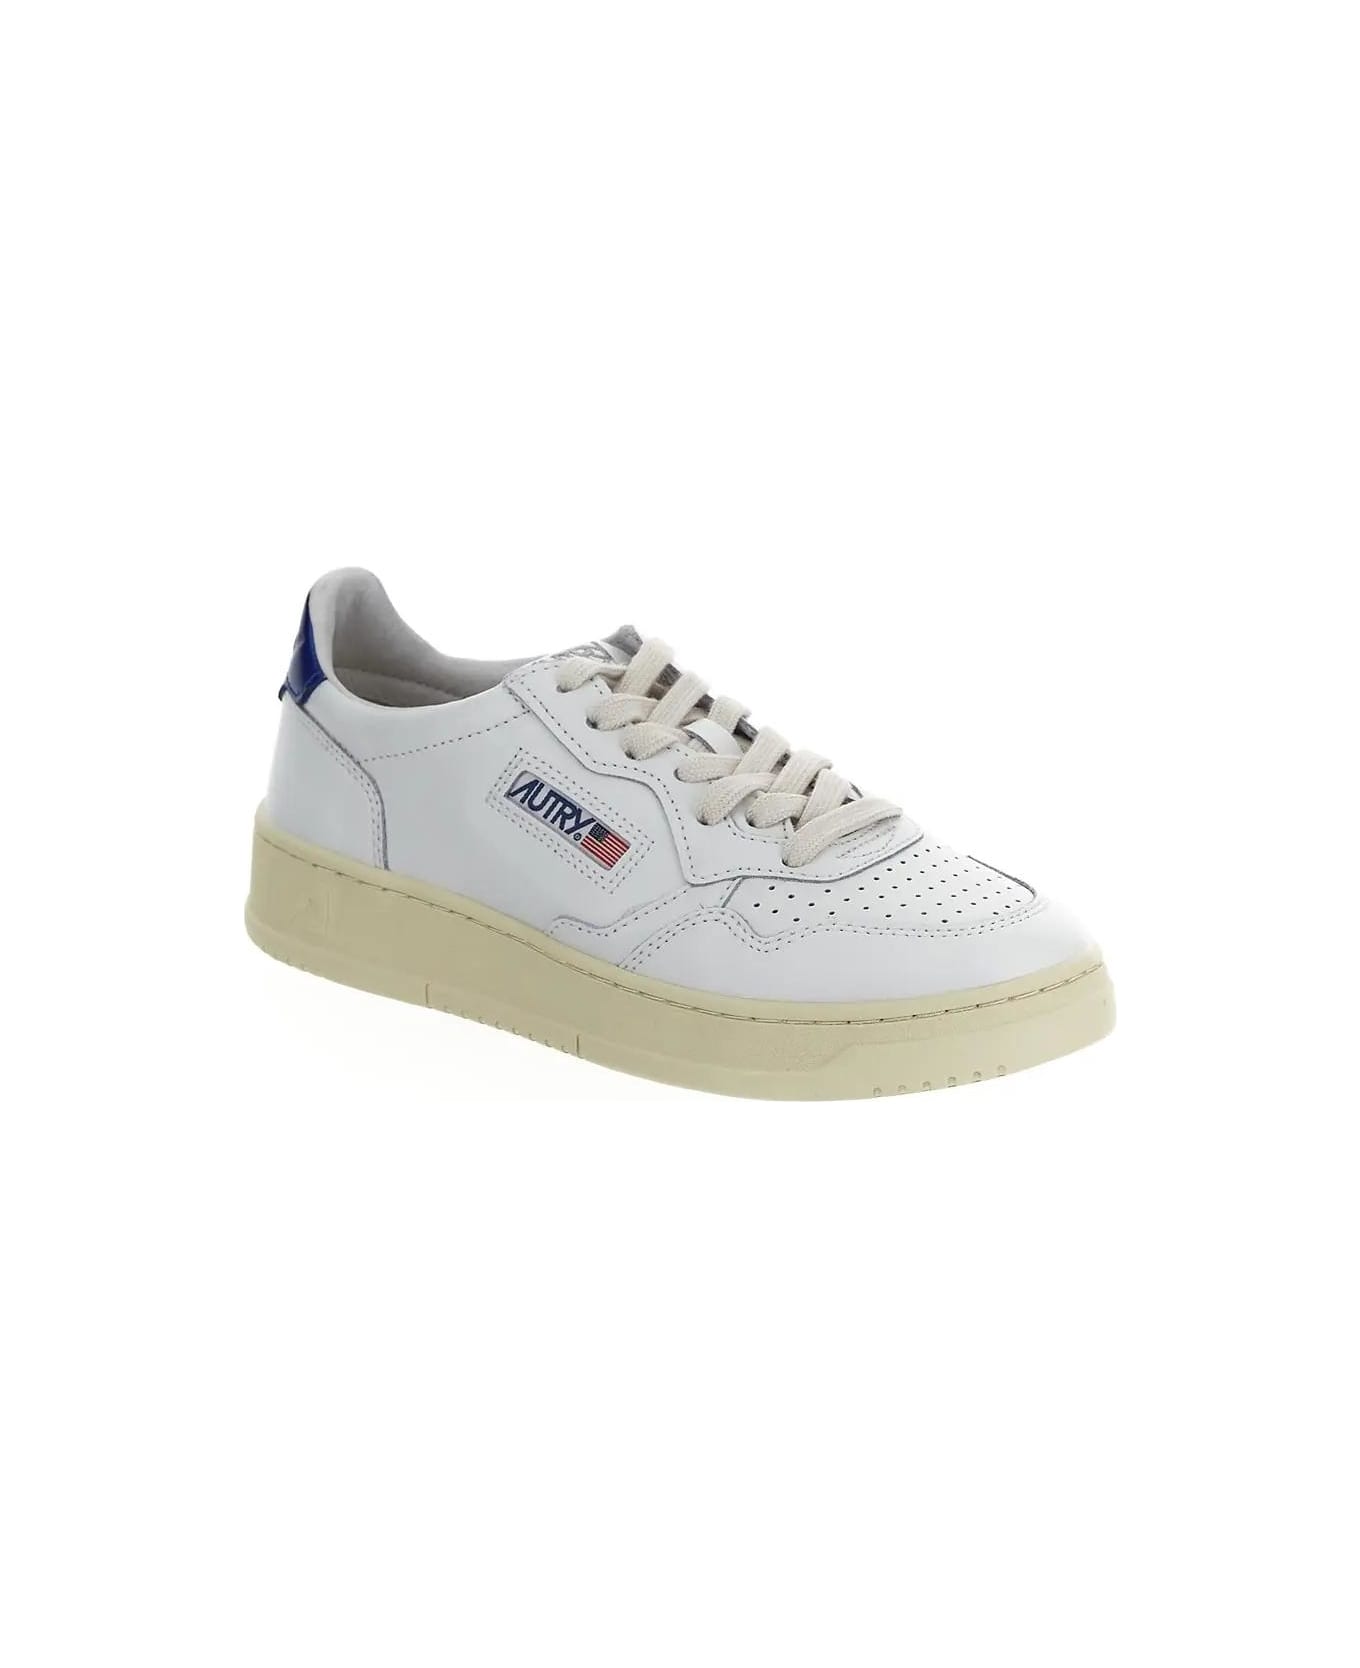 Autry Medalist Low Sneakers - White Blue